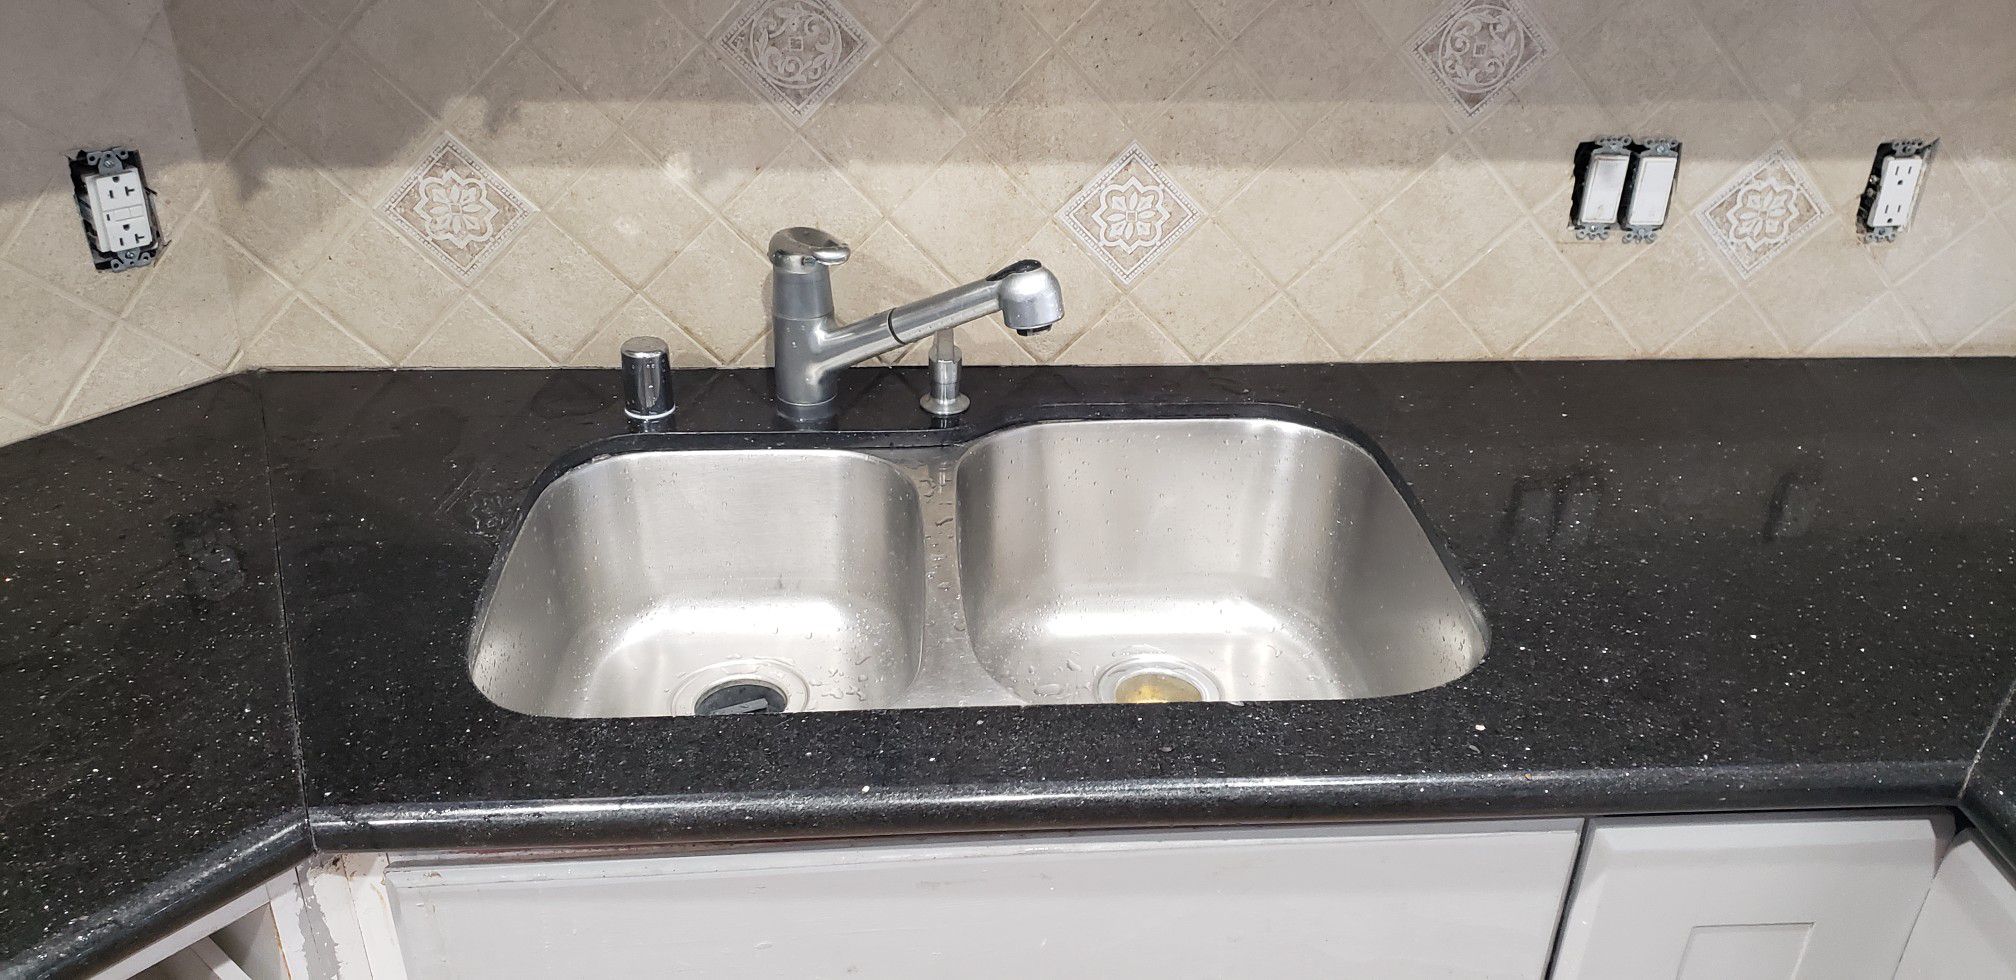 Granite countertops with sink and faucet and base cabinet boxes with wall cabinets!